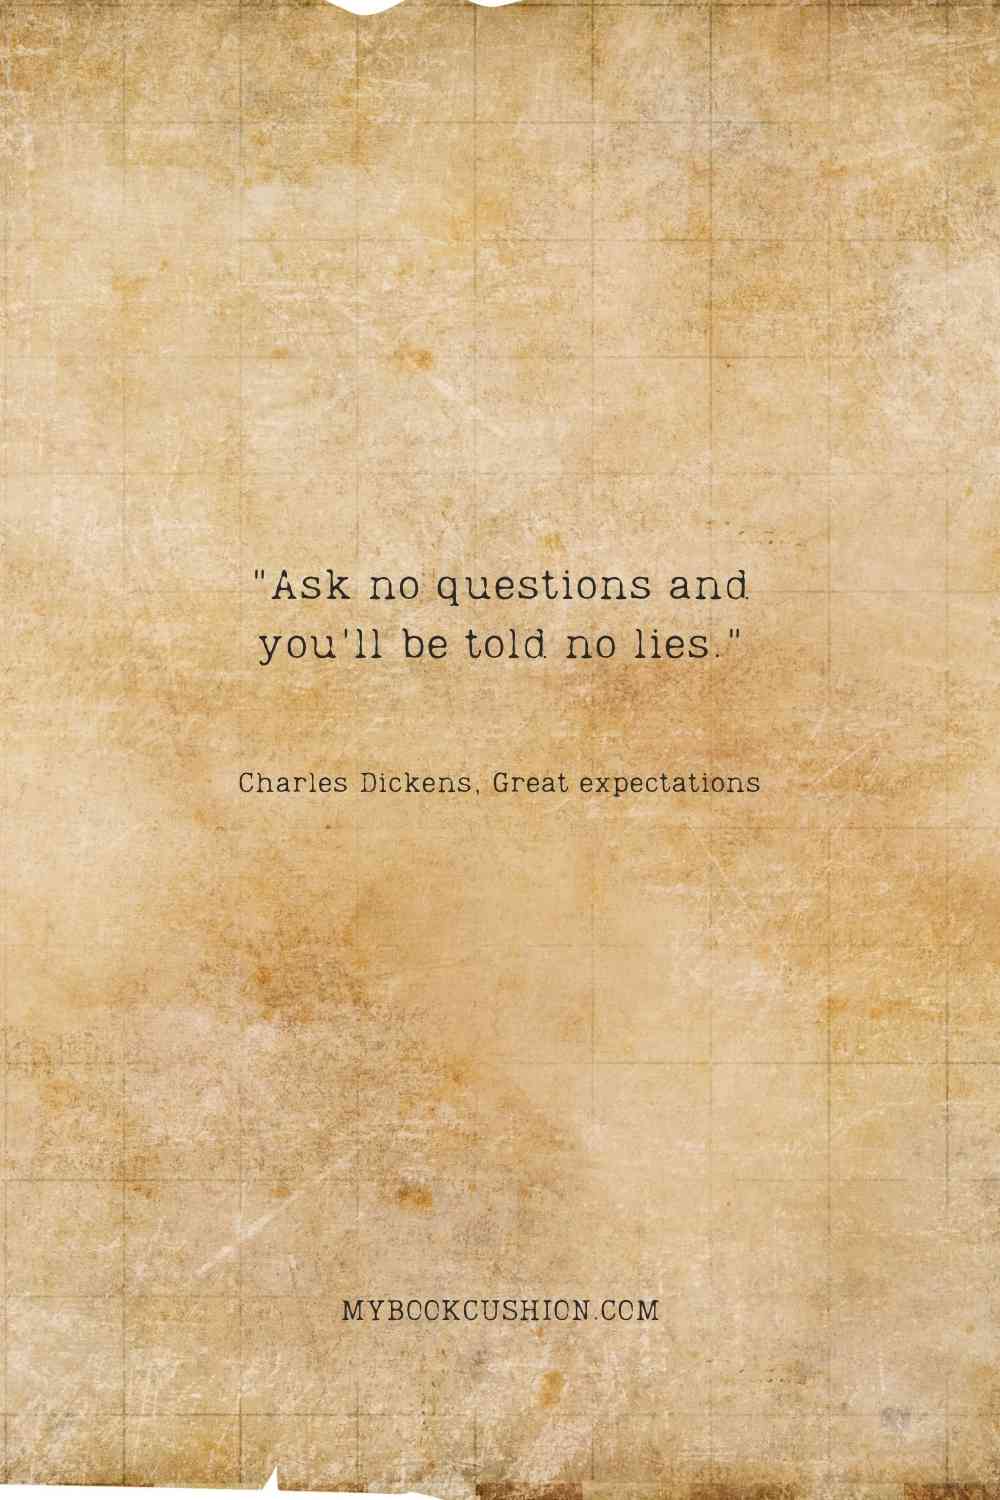 "Ask no questions and you'll be told no lies." -Charles Dickens, Great expectations